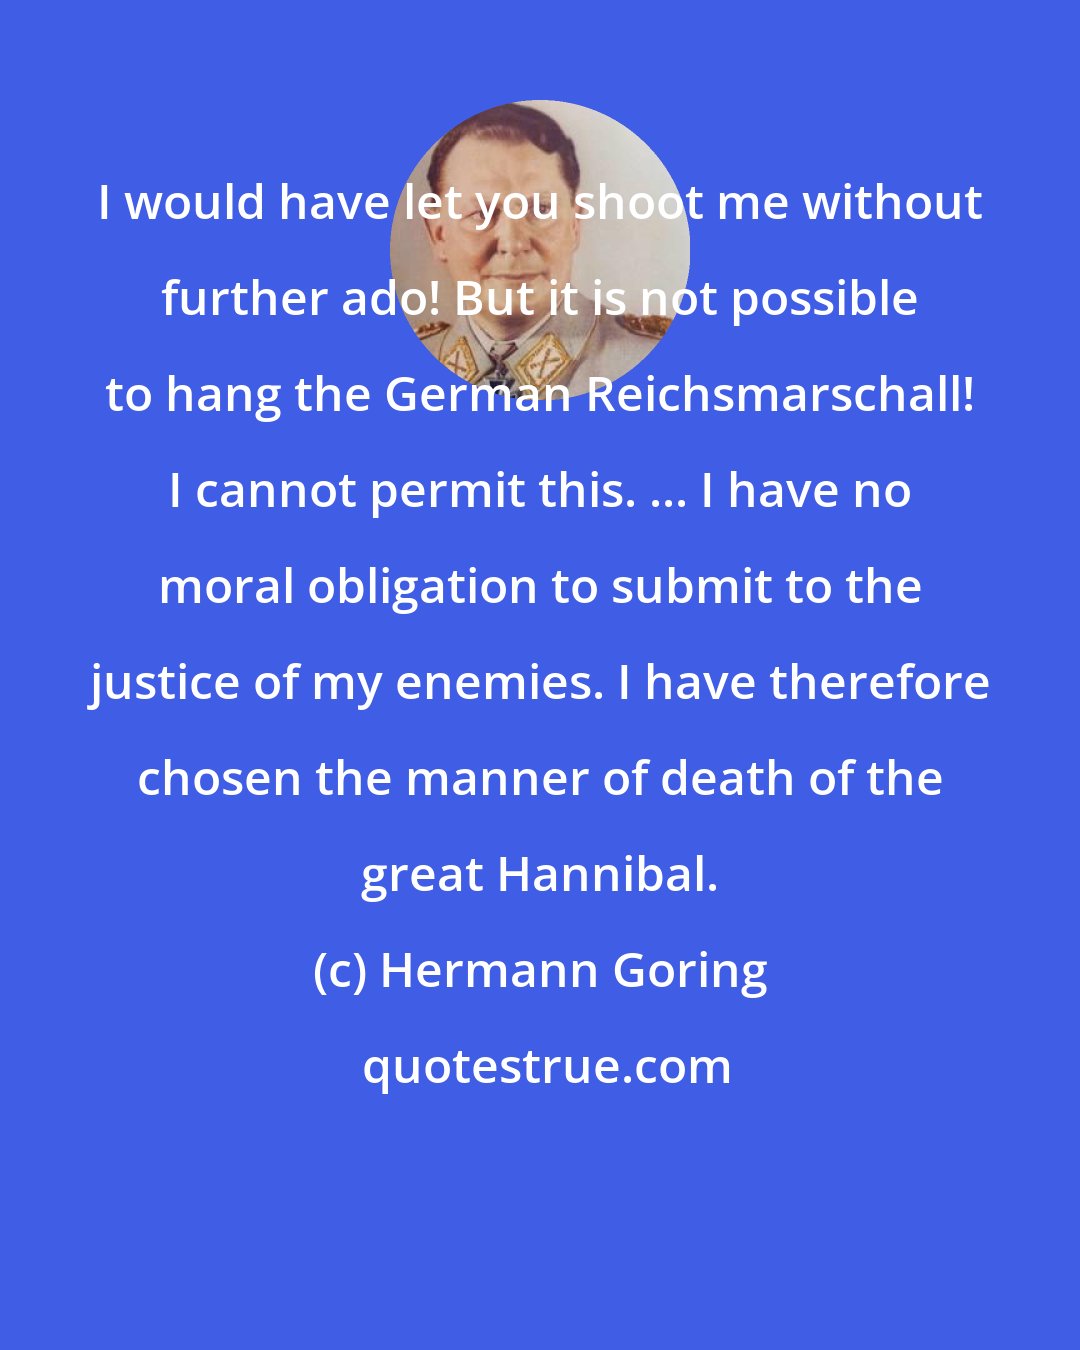 Hermann Goring: I would have let you shoot me without further ado! But it is not possible to hang the German Reichsmarschall! I cannot permit this. ... I have no moral obligation to submit to the justice of my enemies. I have therefore chosen the manner of death of the great Hannibal.